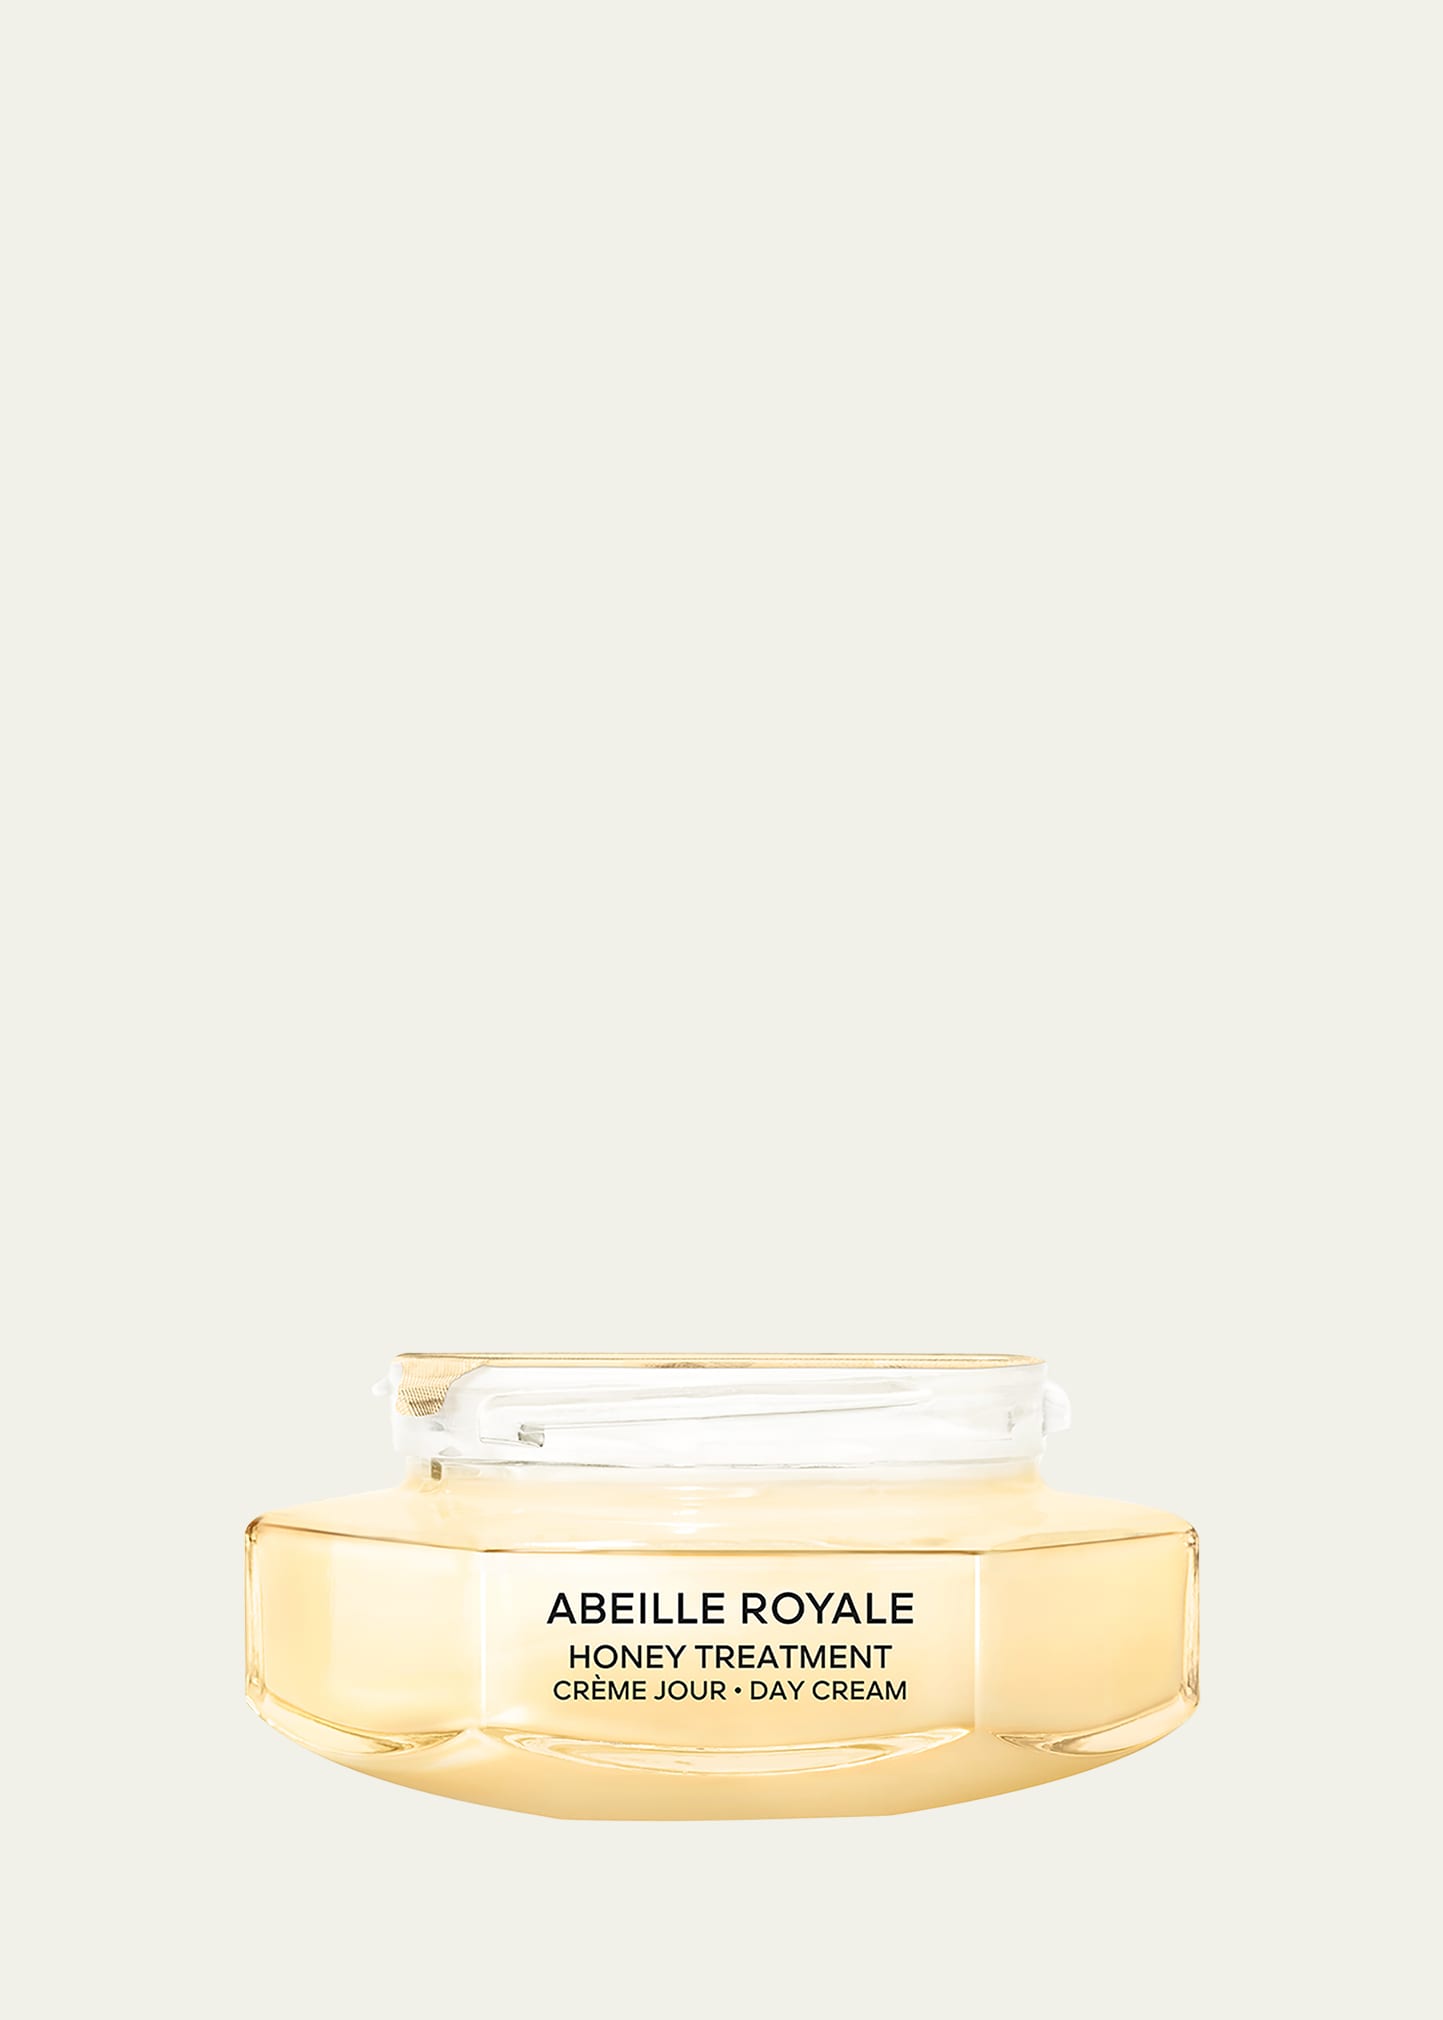 Abeille Royale Honey Treatment Day Cream with Hyaluronic Acid, The Refill, 1.7 oz.